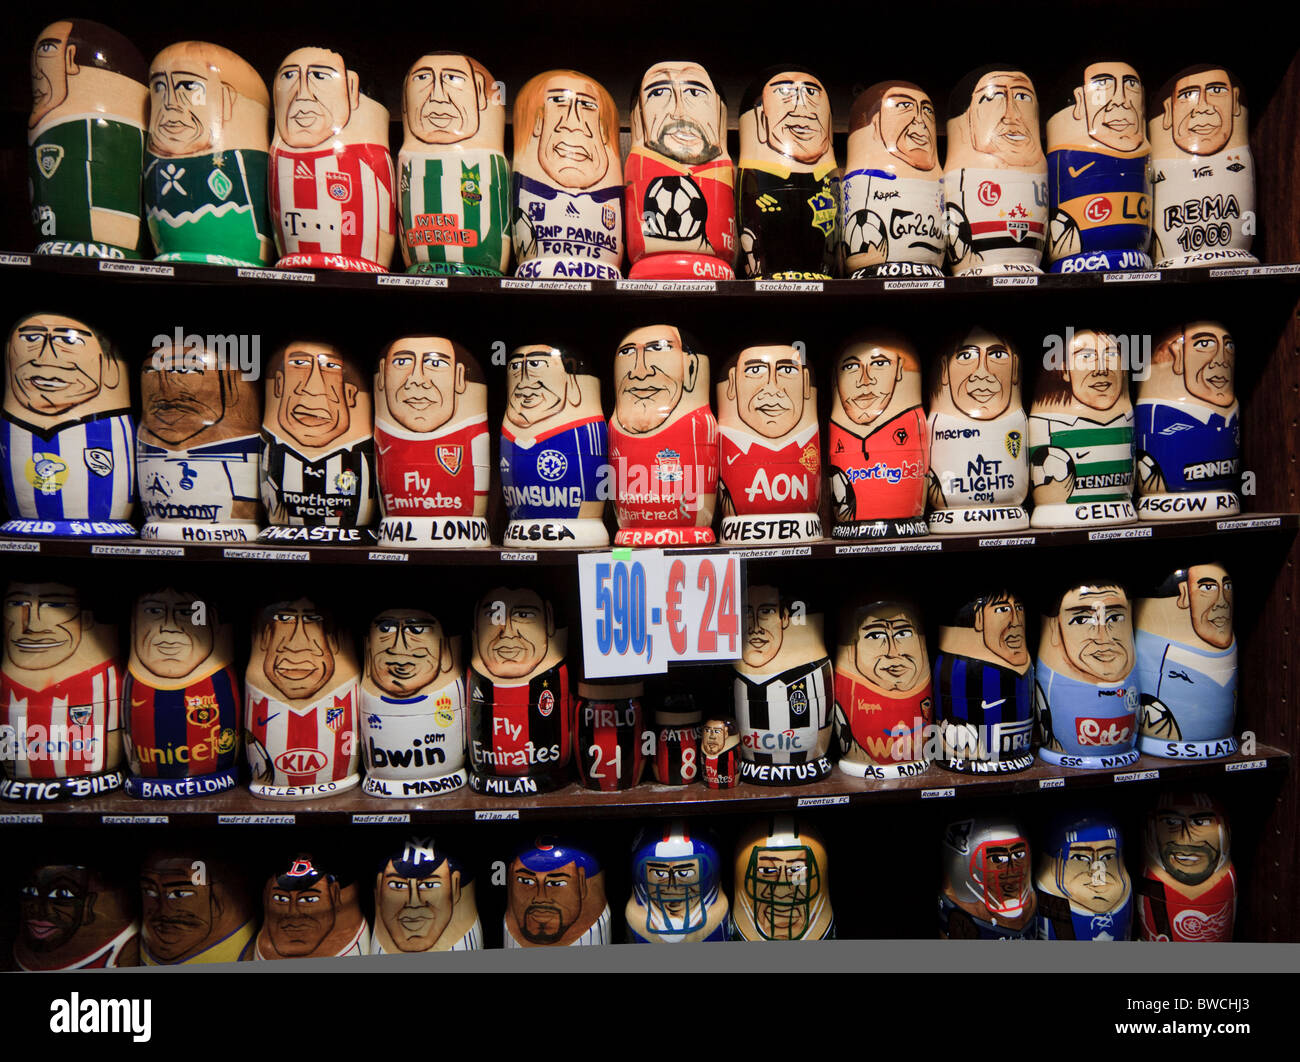 Russian dolls in the team strips of 